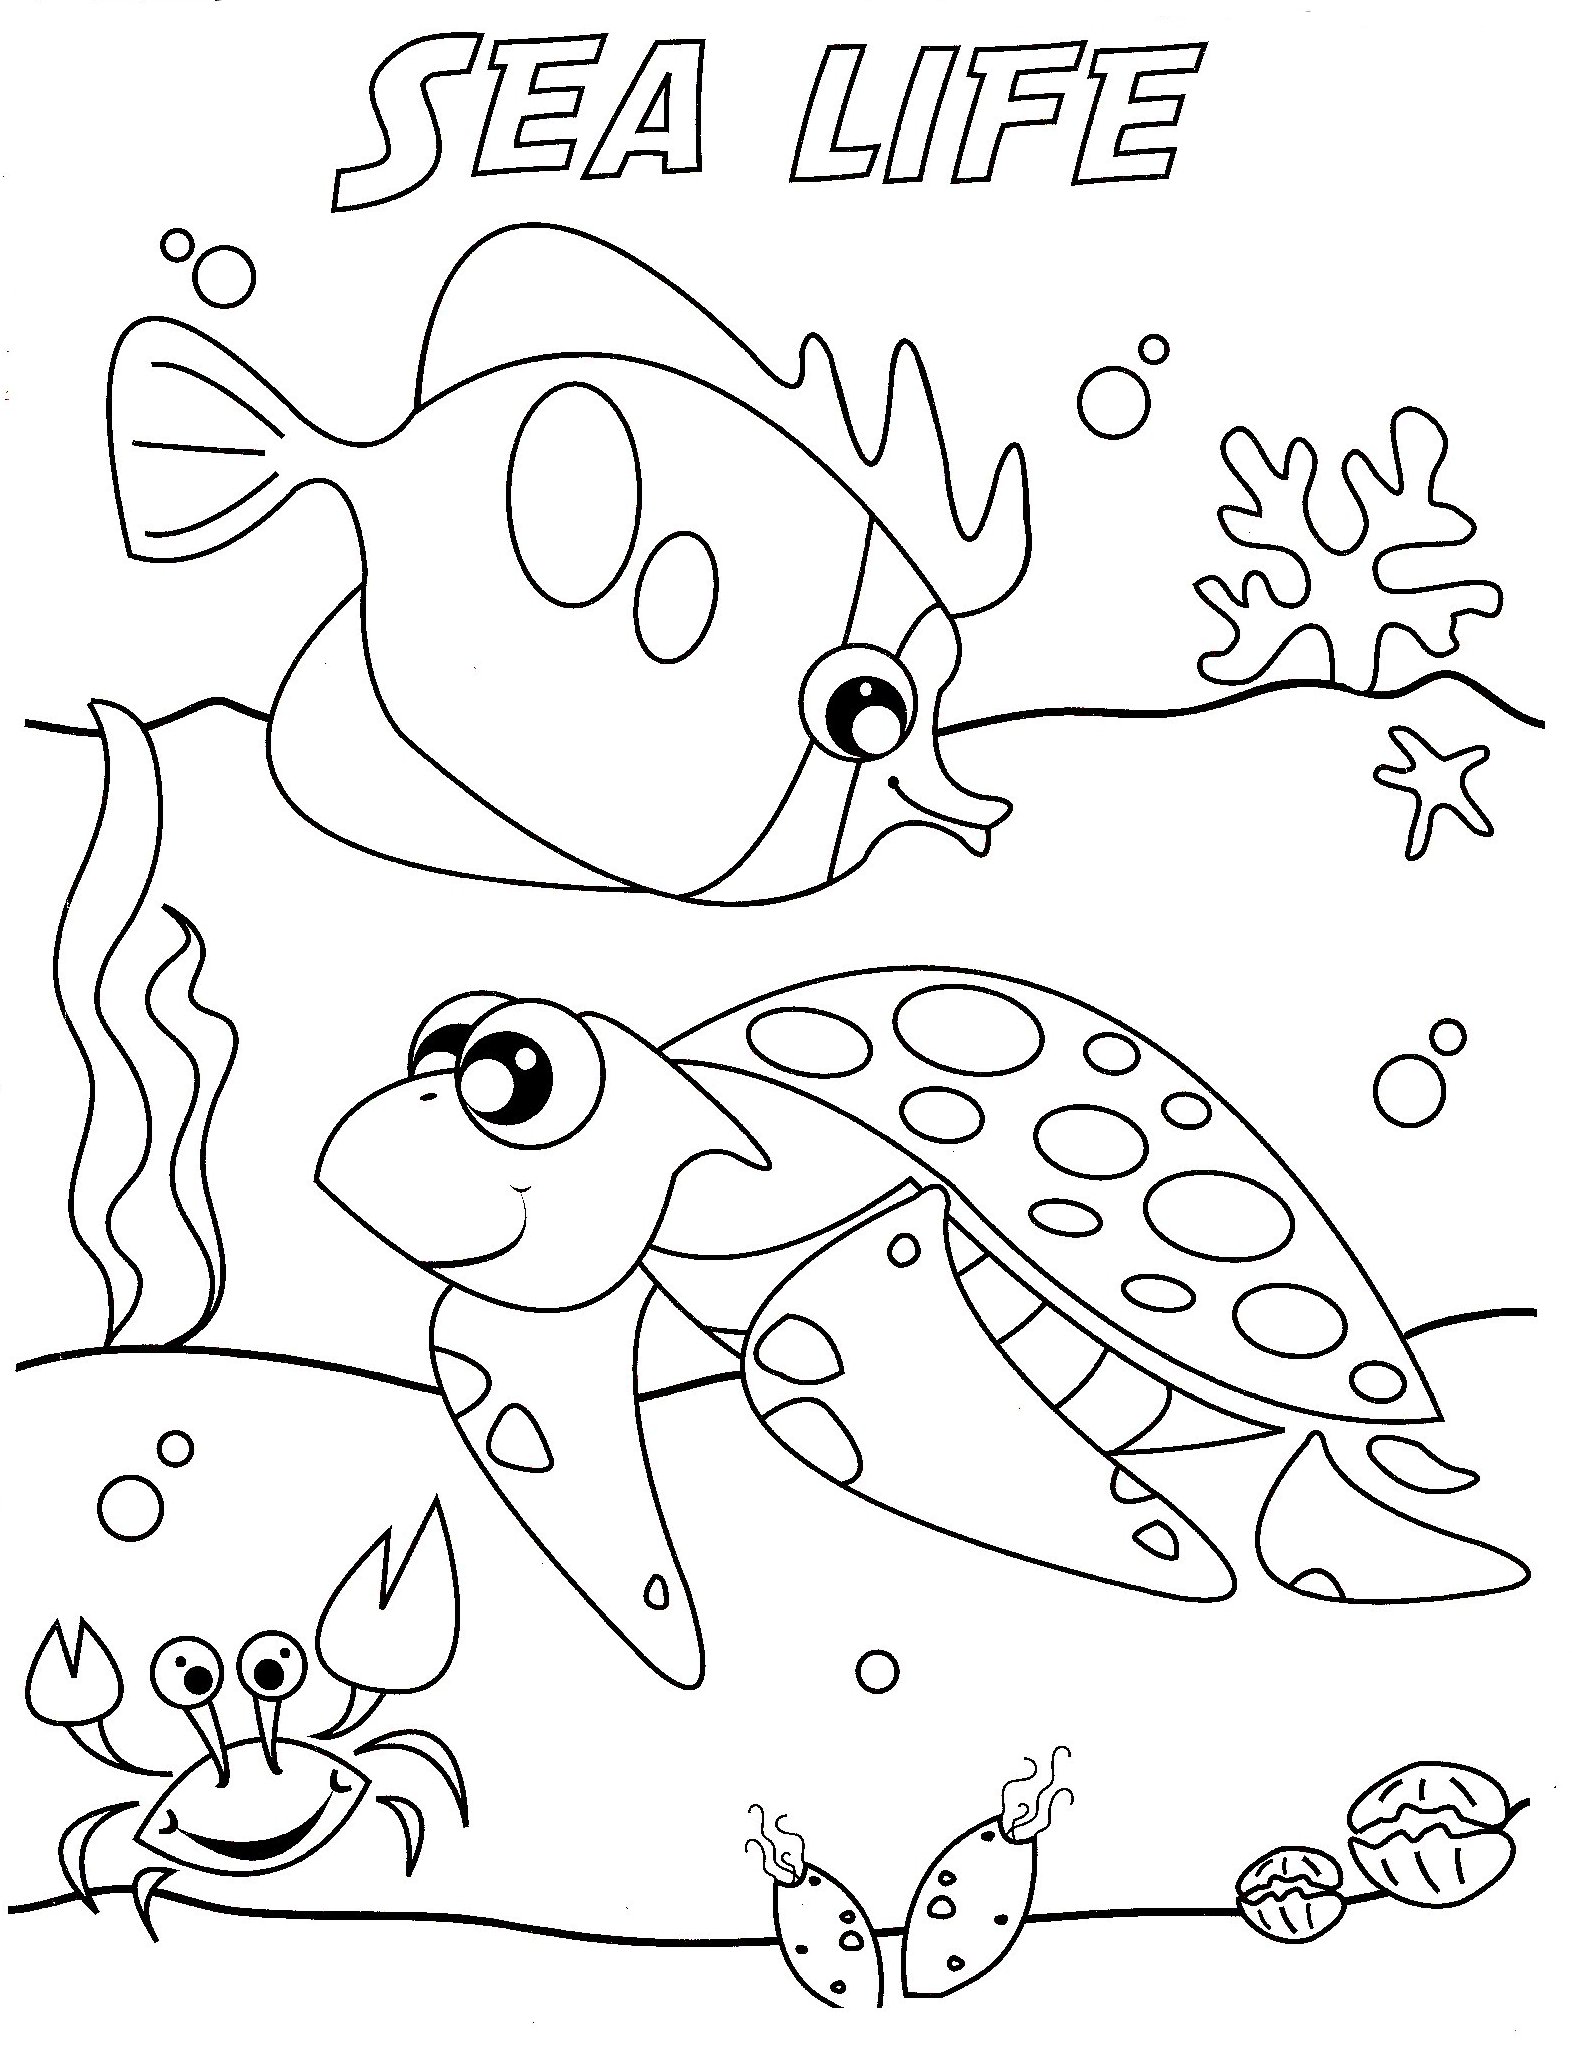 Sea Life Coloring Pages / Free Under the Sea Coloring Pages to print